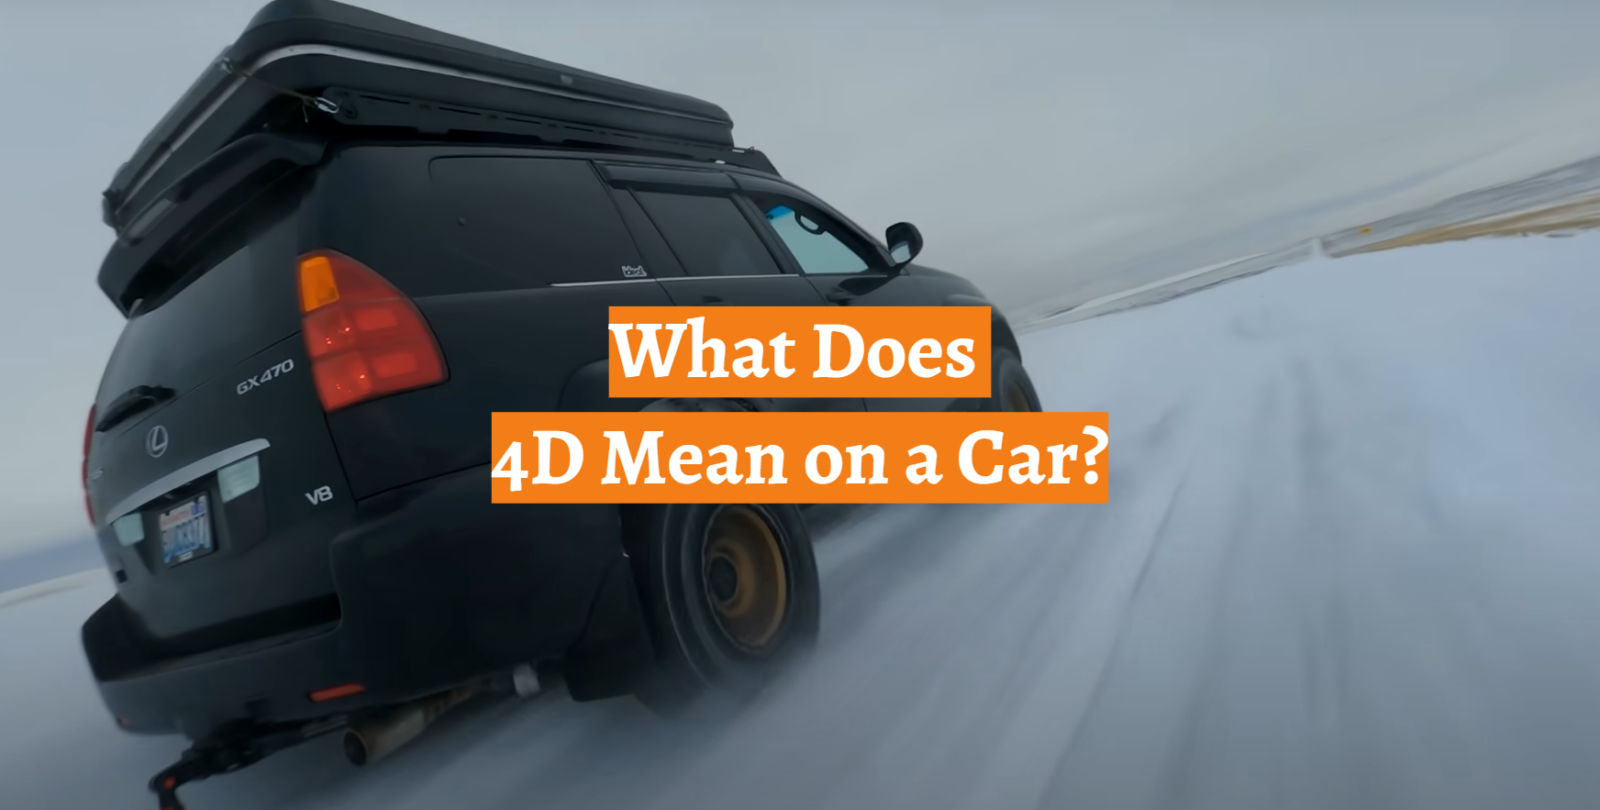 What Does 4D Mean on a Car?